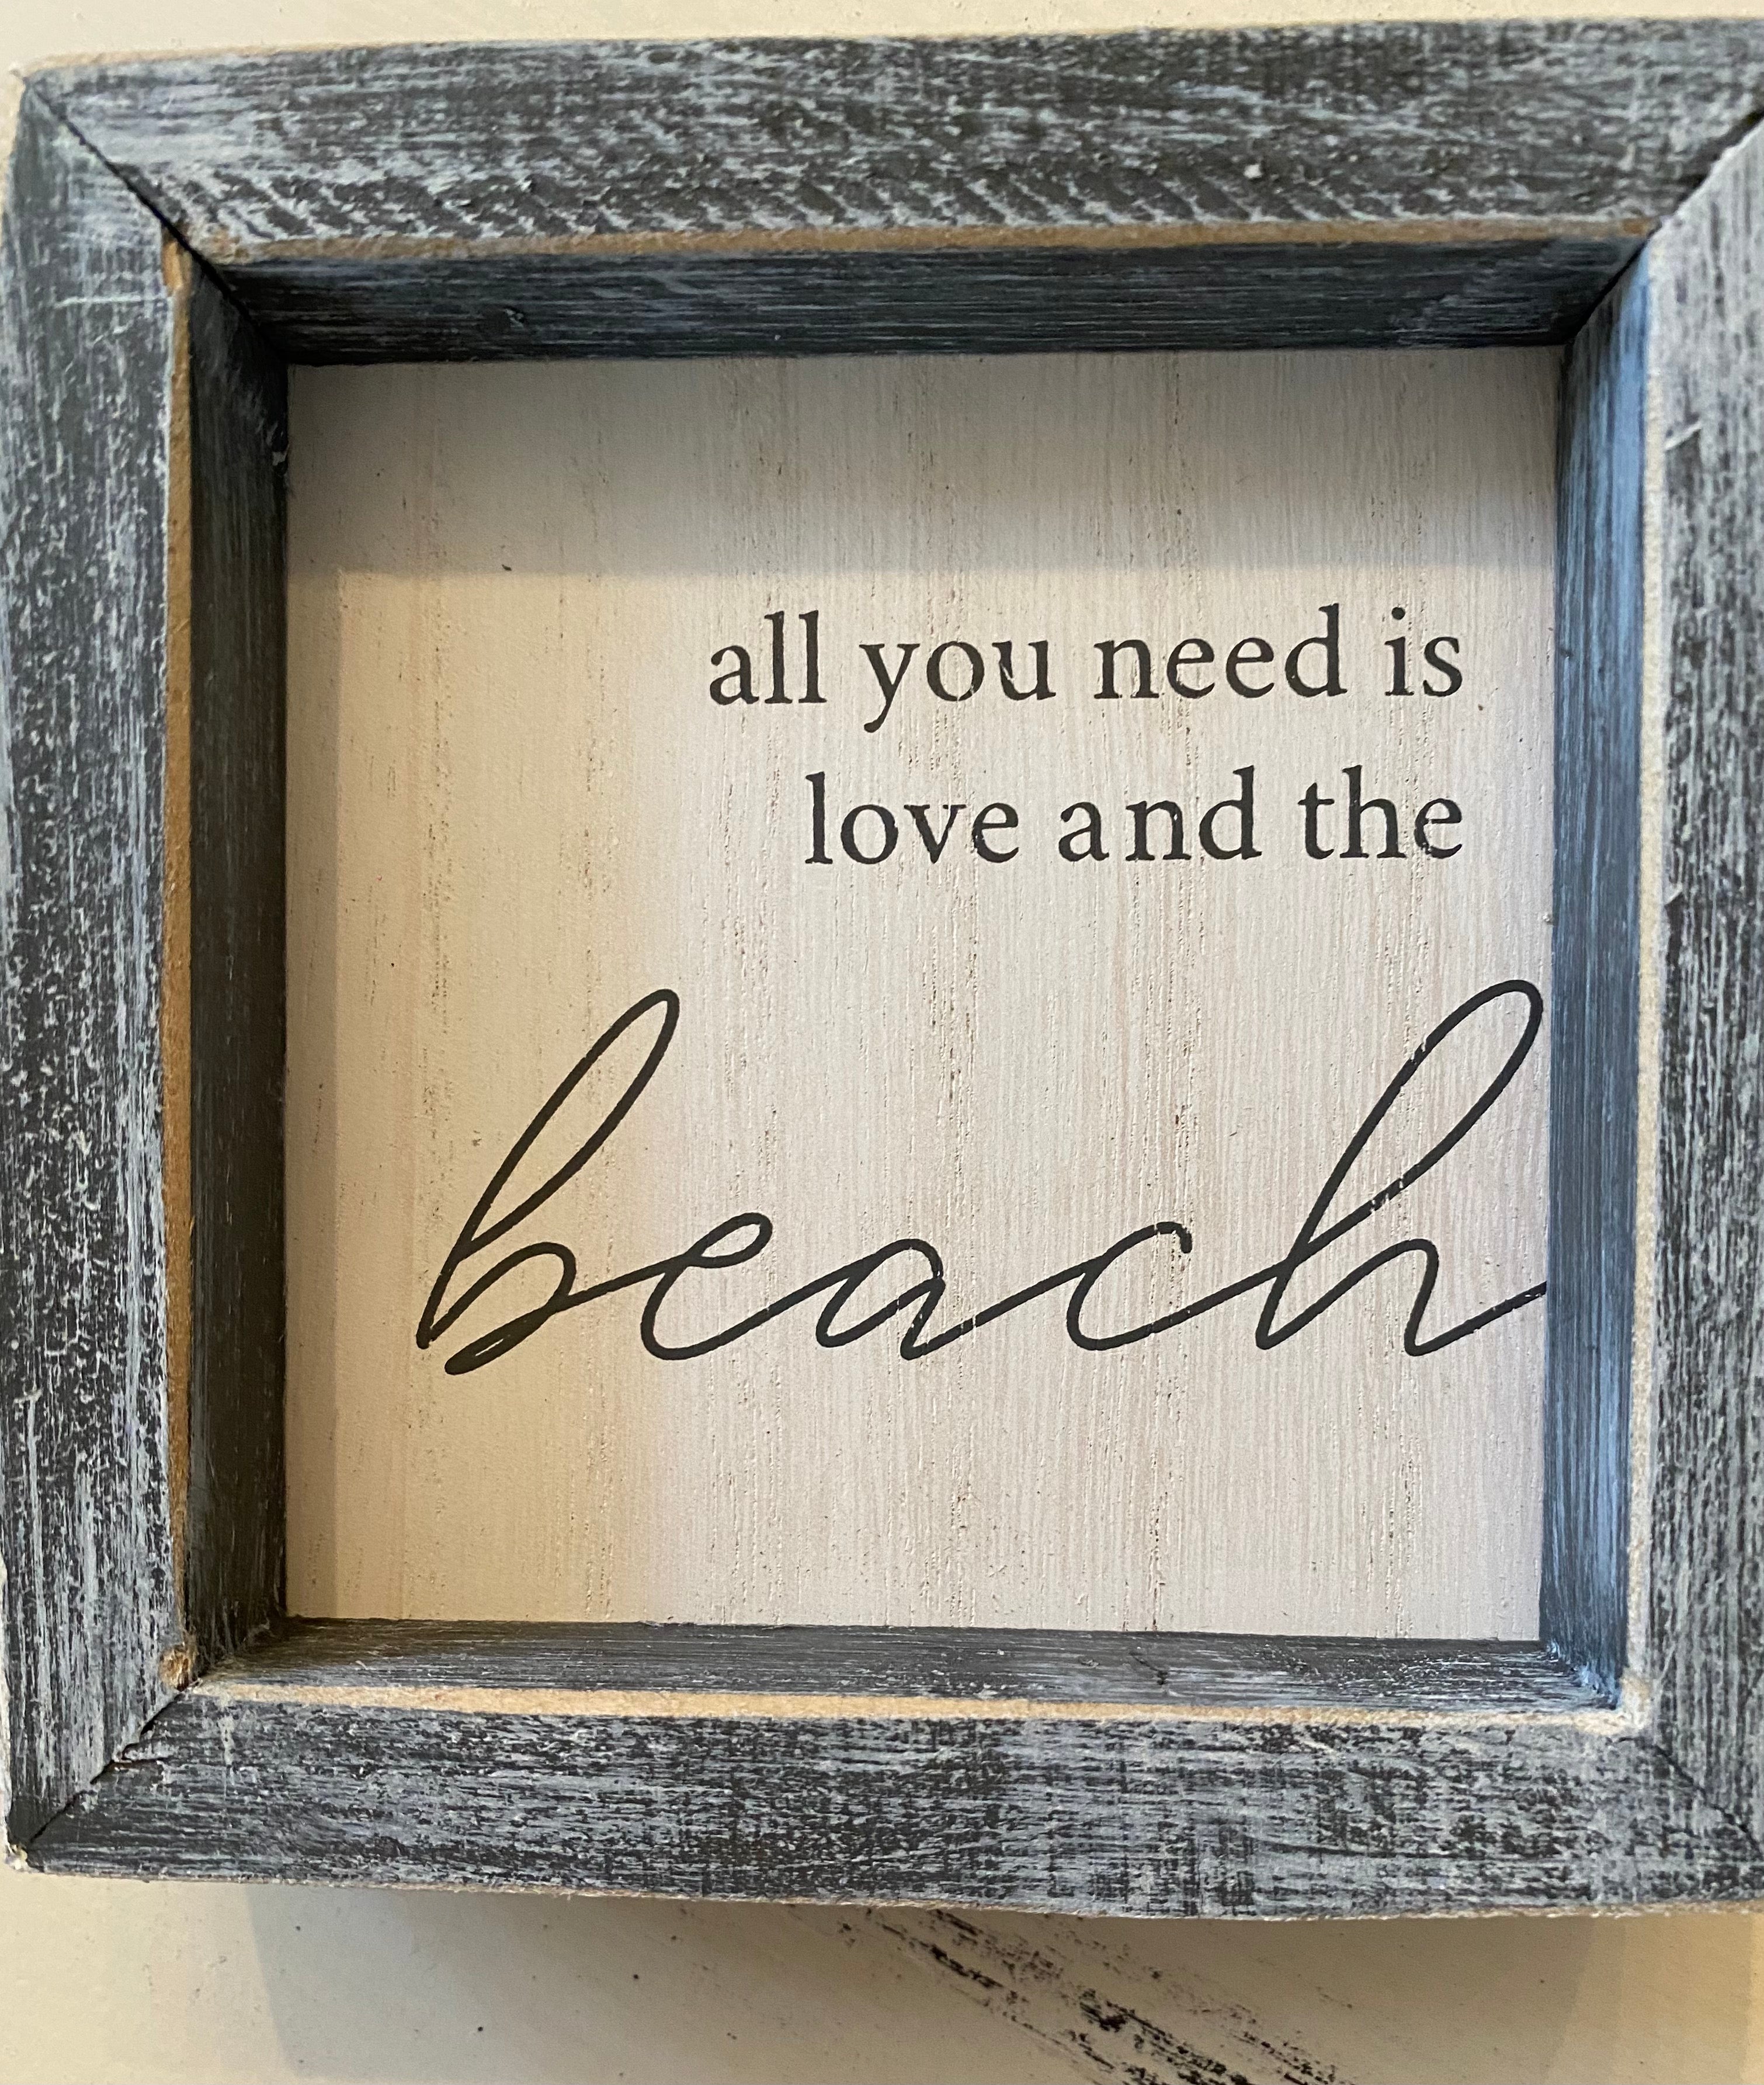 All you need is love and the beach